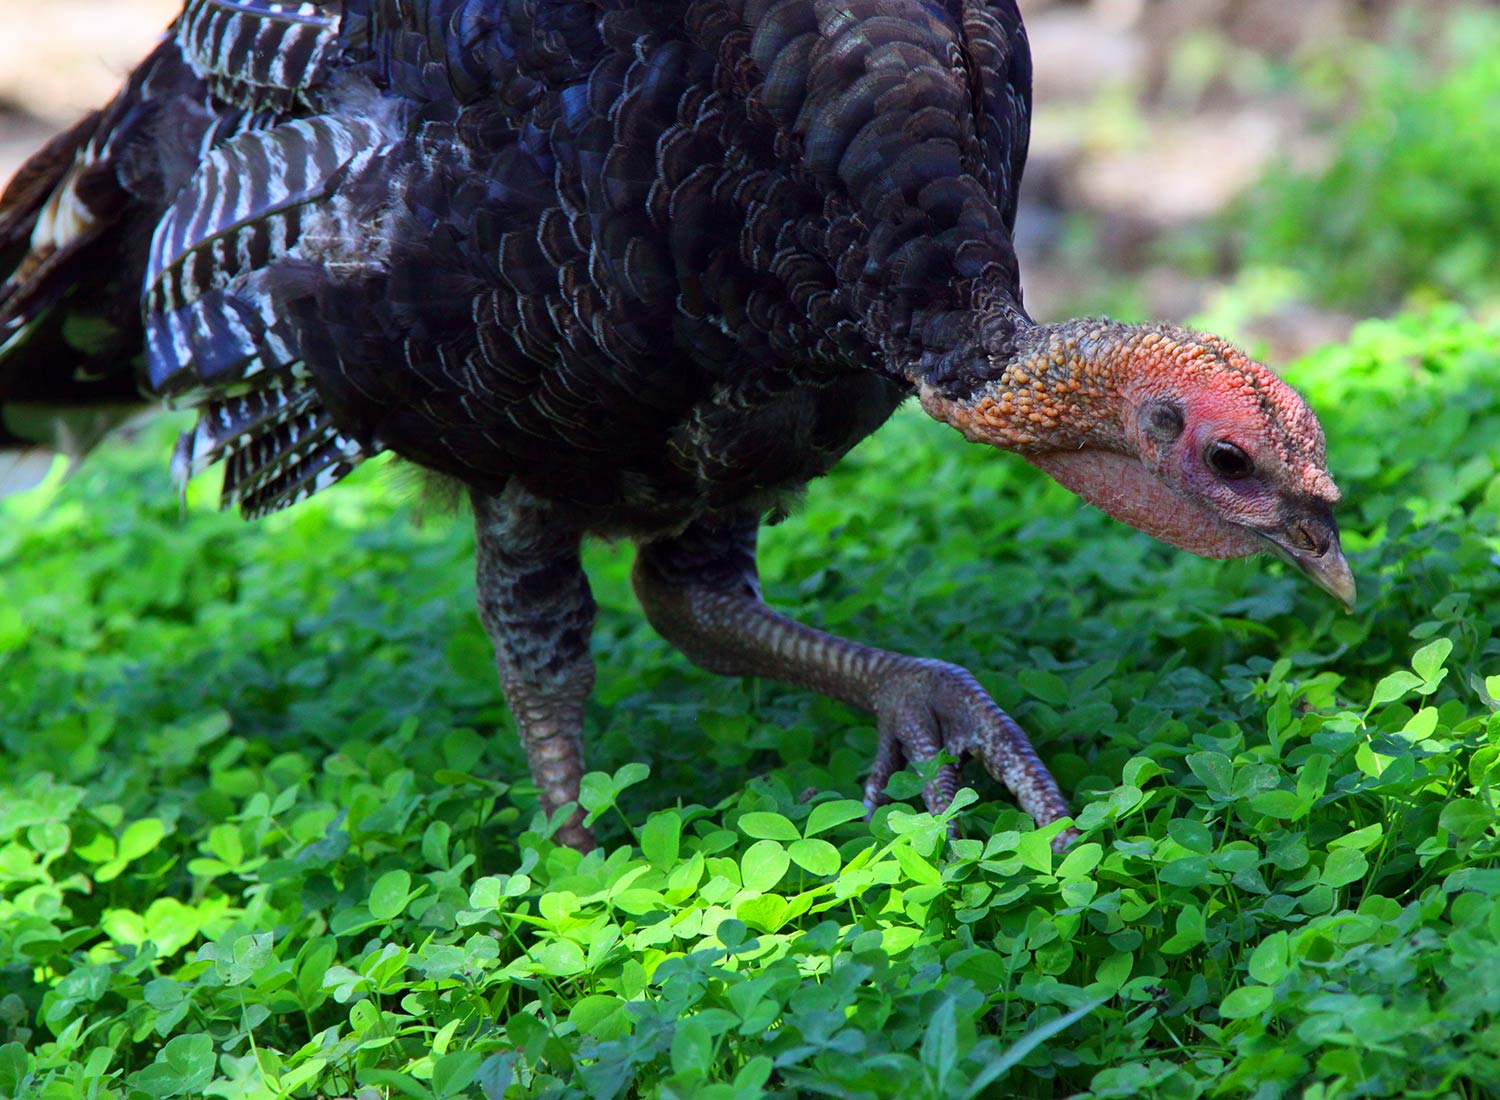 Photo © Susan C. Morse, SHO Farm's wildlife biologist | one of our land stewardship practices is to ensure safe & healthy habitat for wildlife like this turkey feeding on forbs